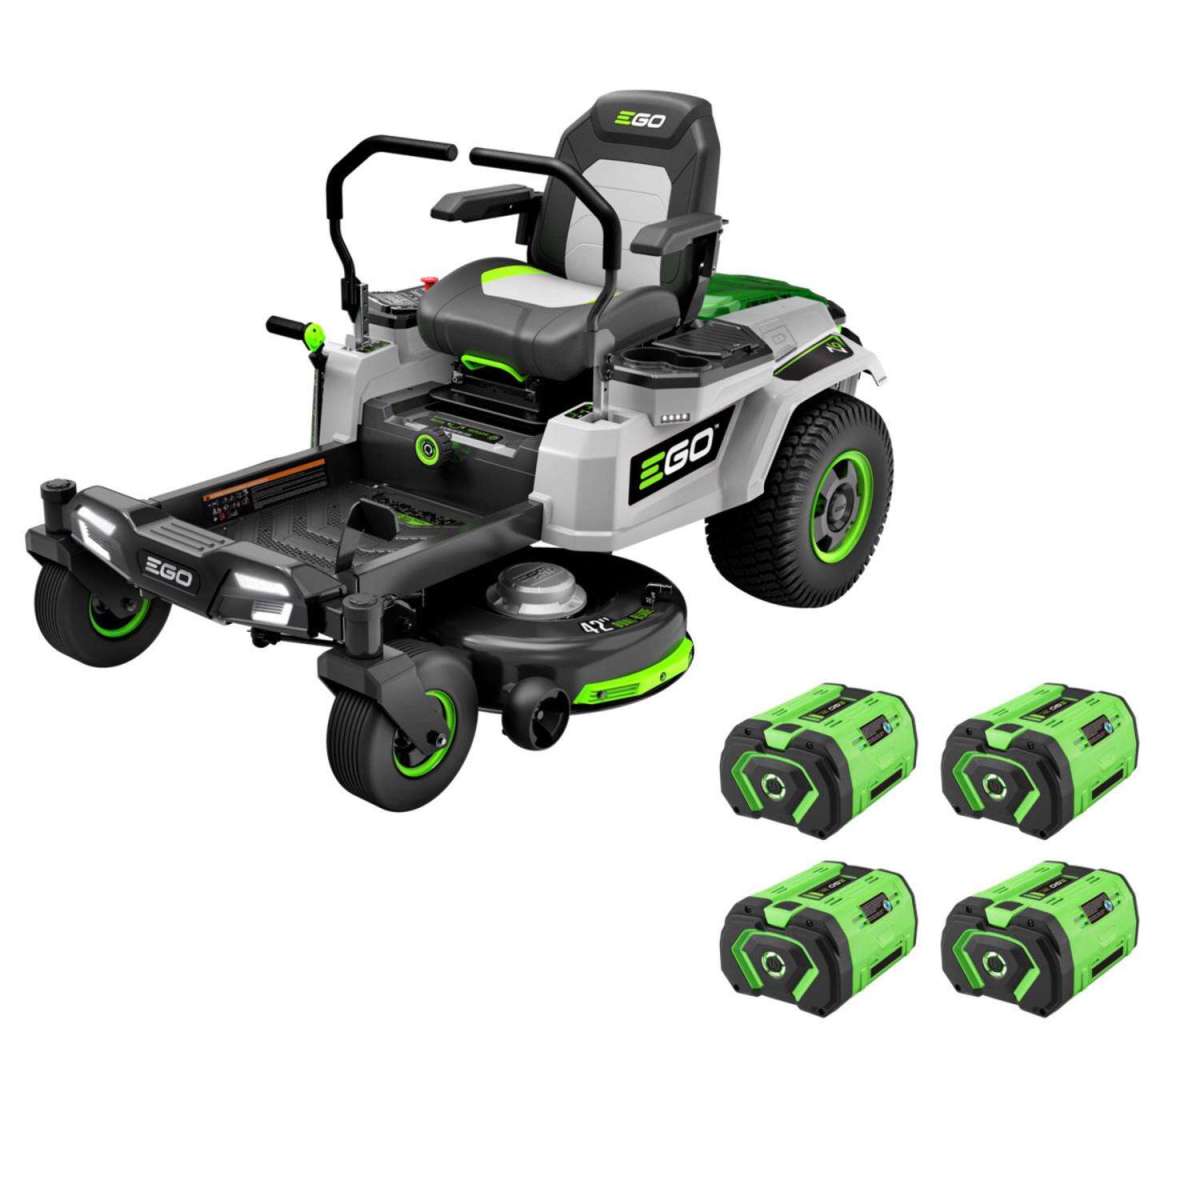 Ego Power+ Z6 riding mower comes with four rechargeable 56V batteries